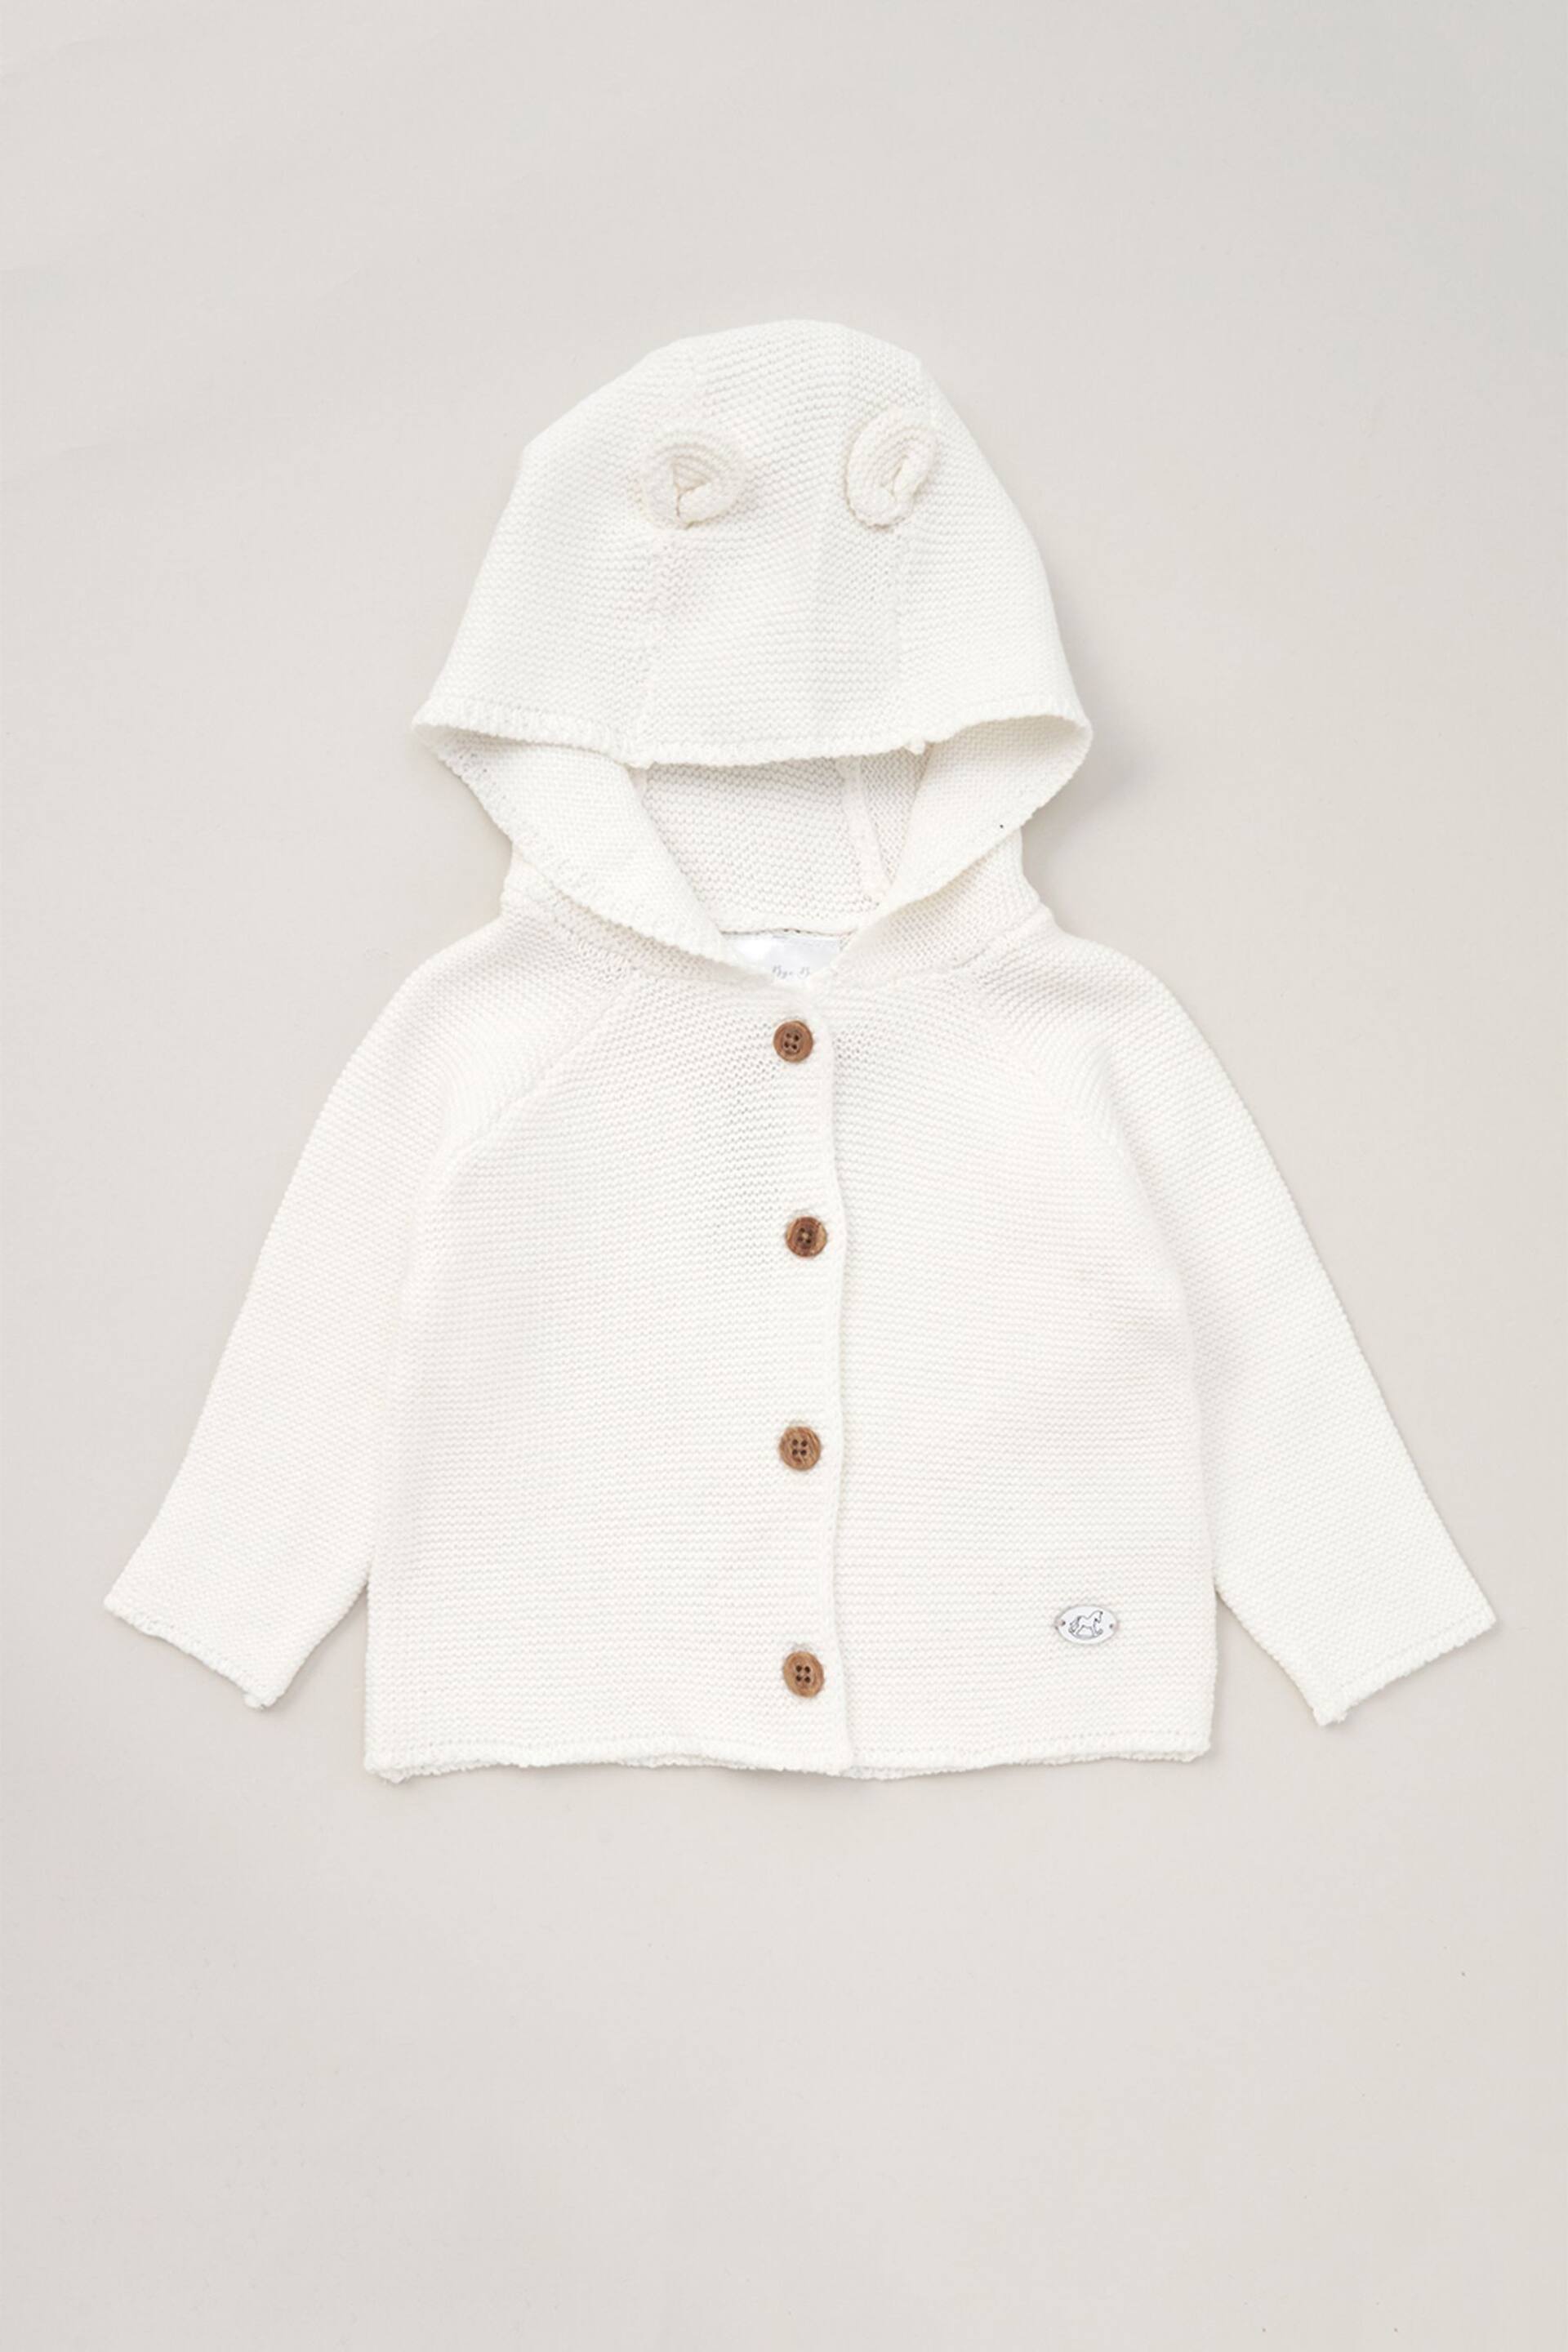 Rock-A-Bye Baby Boutique Hooded Bear Cotton Knit White Cardigan - Image 1 of 1